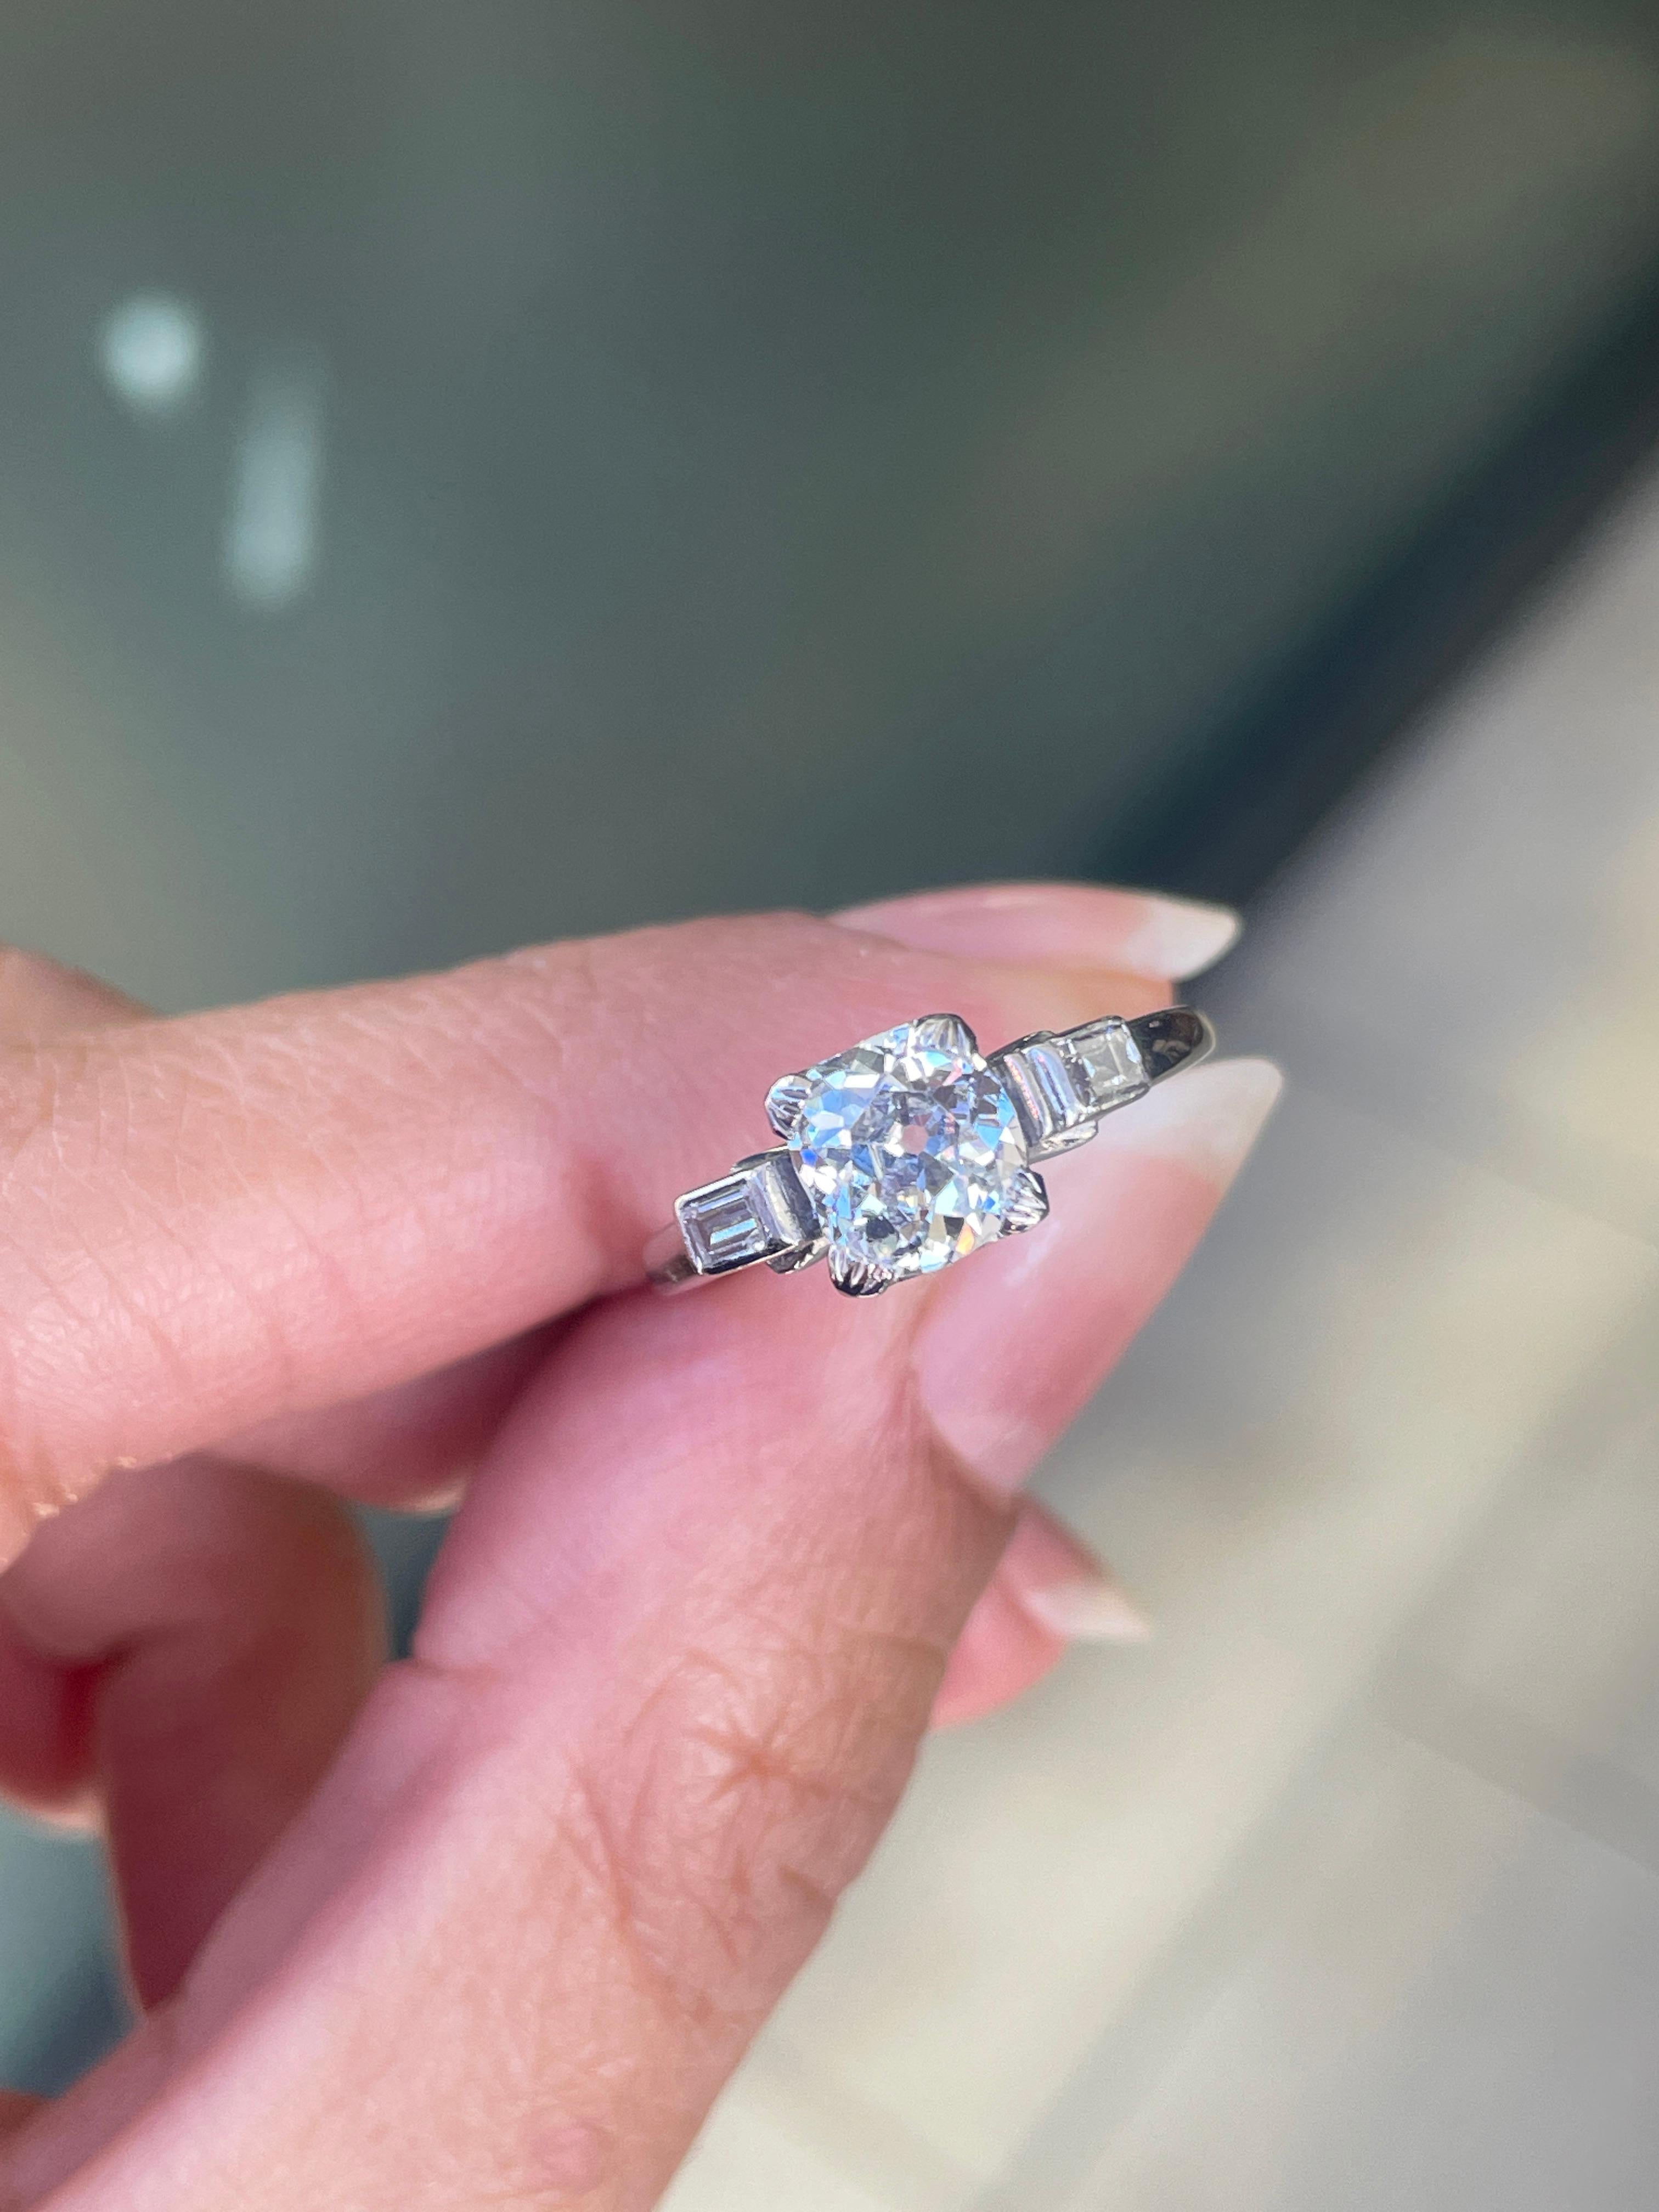 The unique beauty of this magnificent engagement ring cannot be matched!

This wonderful antique three-stone engagement ring is beautifully centred with an old mine cut diamond weighing 1.17ct, mounted in an open back setting and secured within four